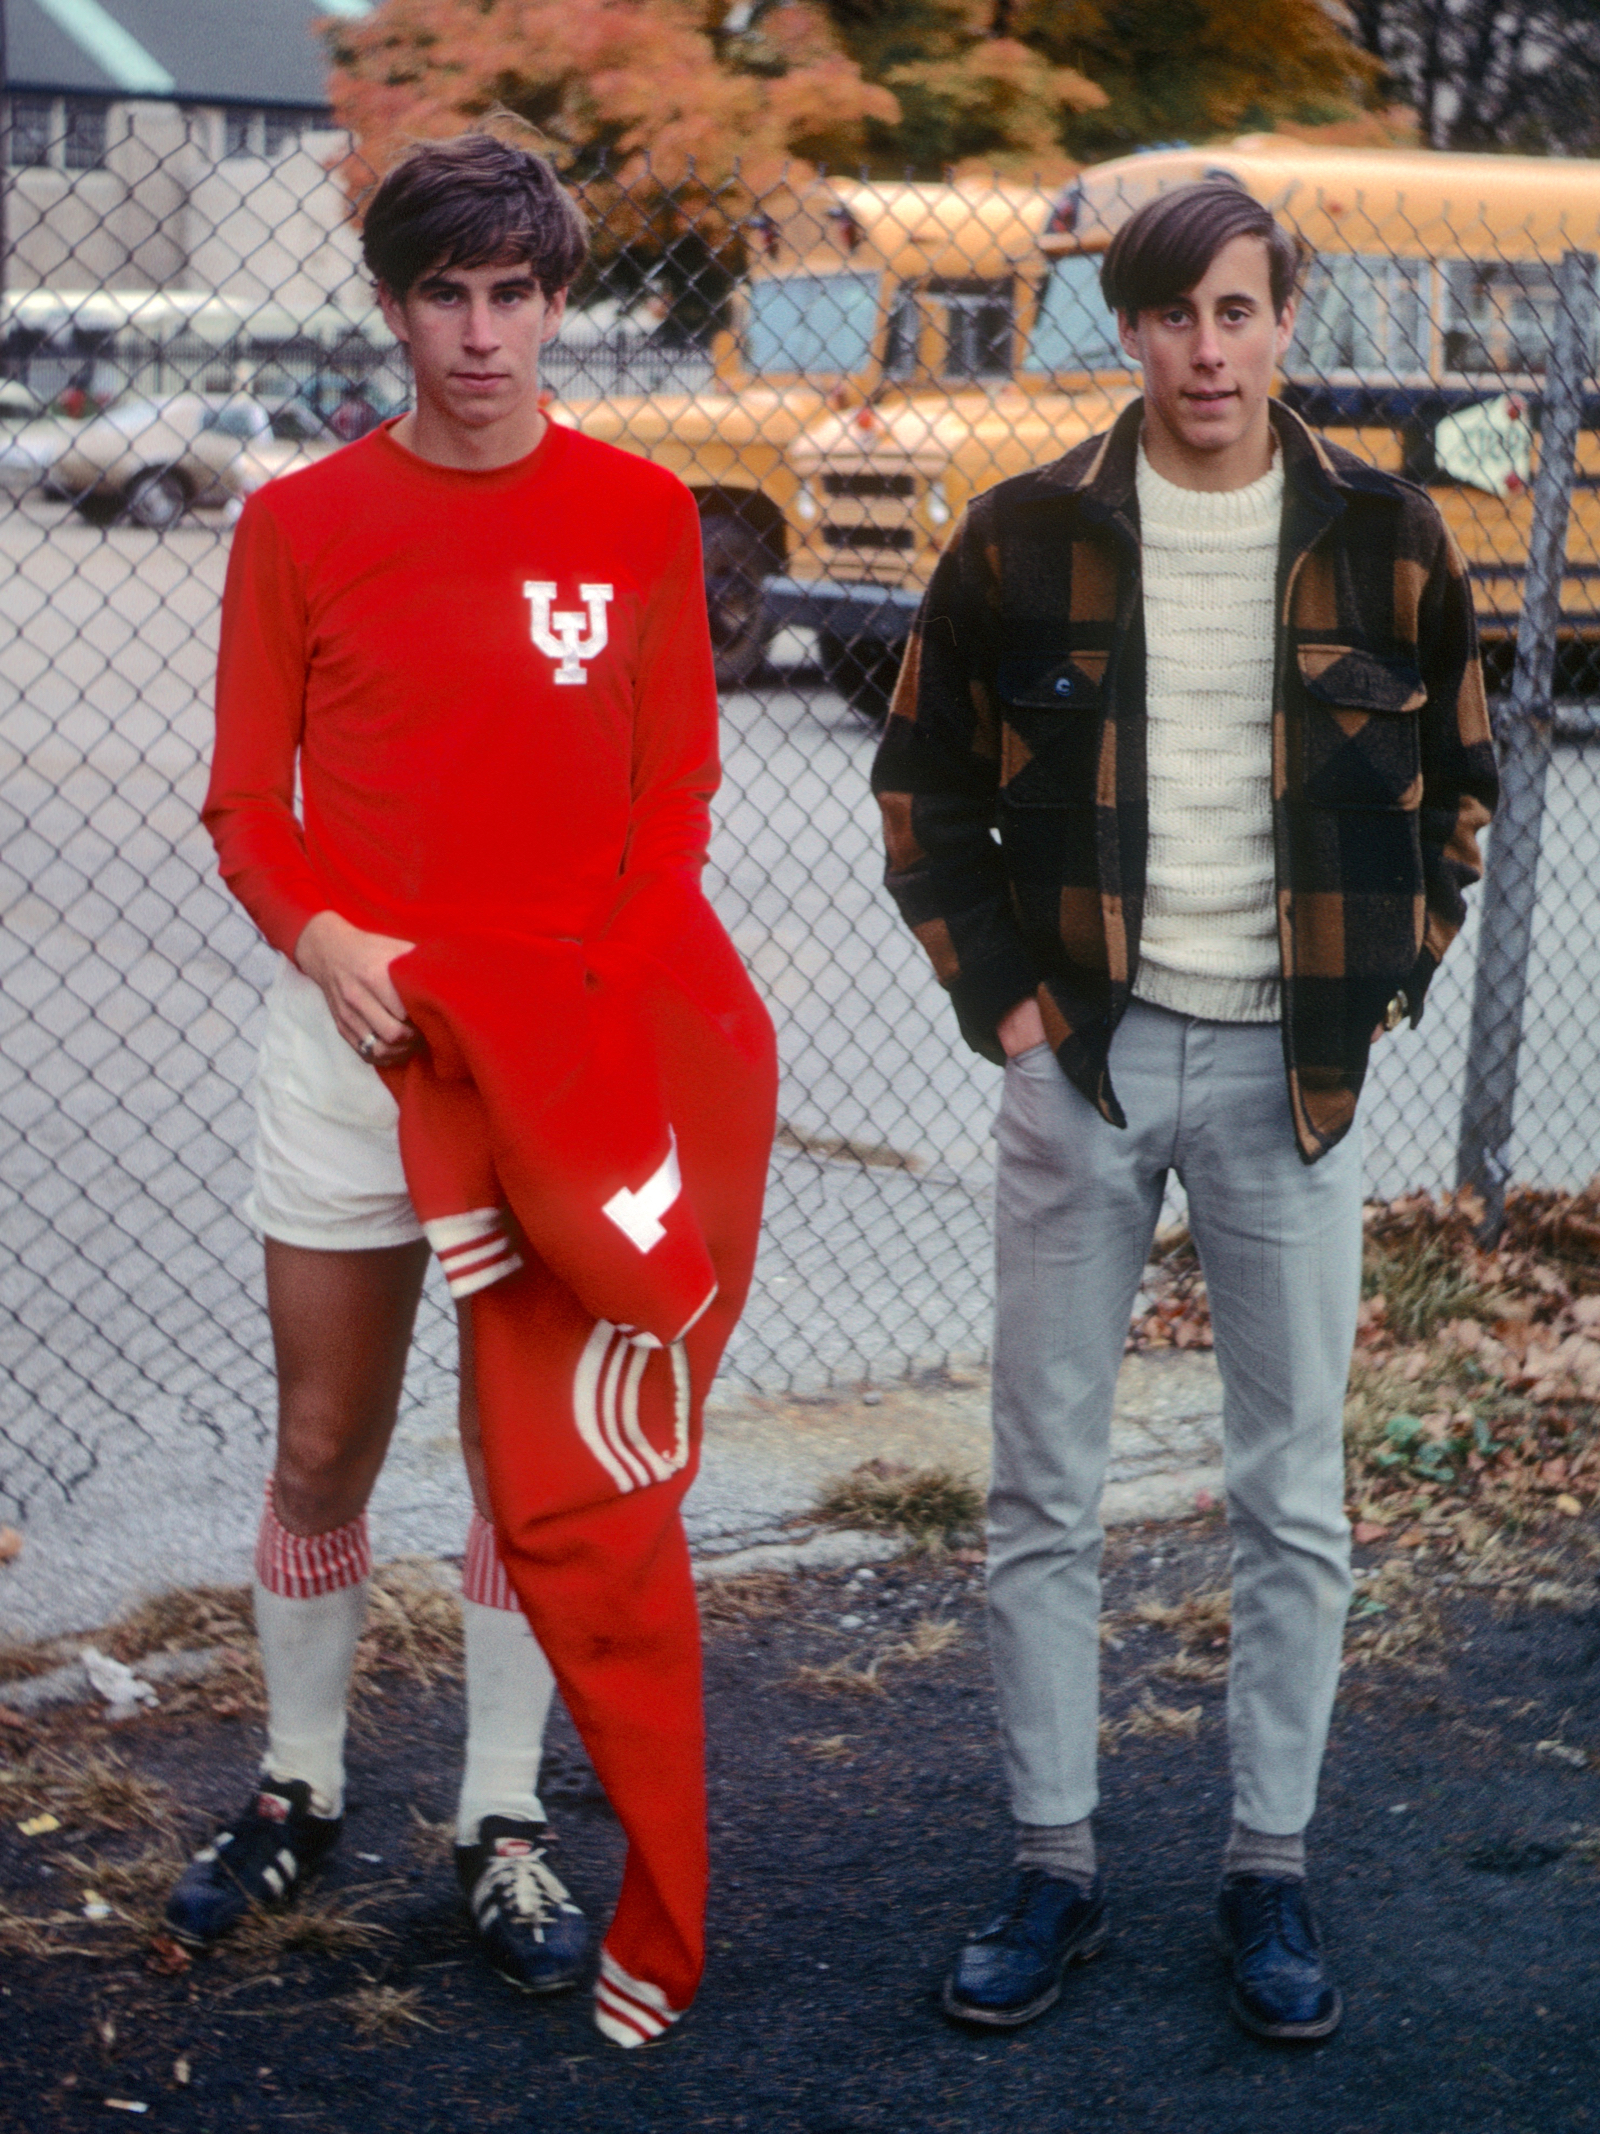 Paul playing soccer at IU in the old football stadium vs. St. Louis 1968. Photo by Leo Dodd.